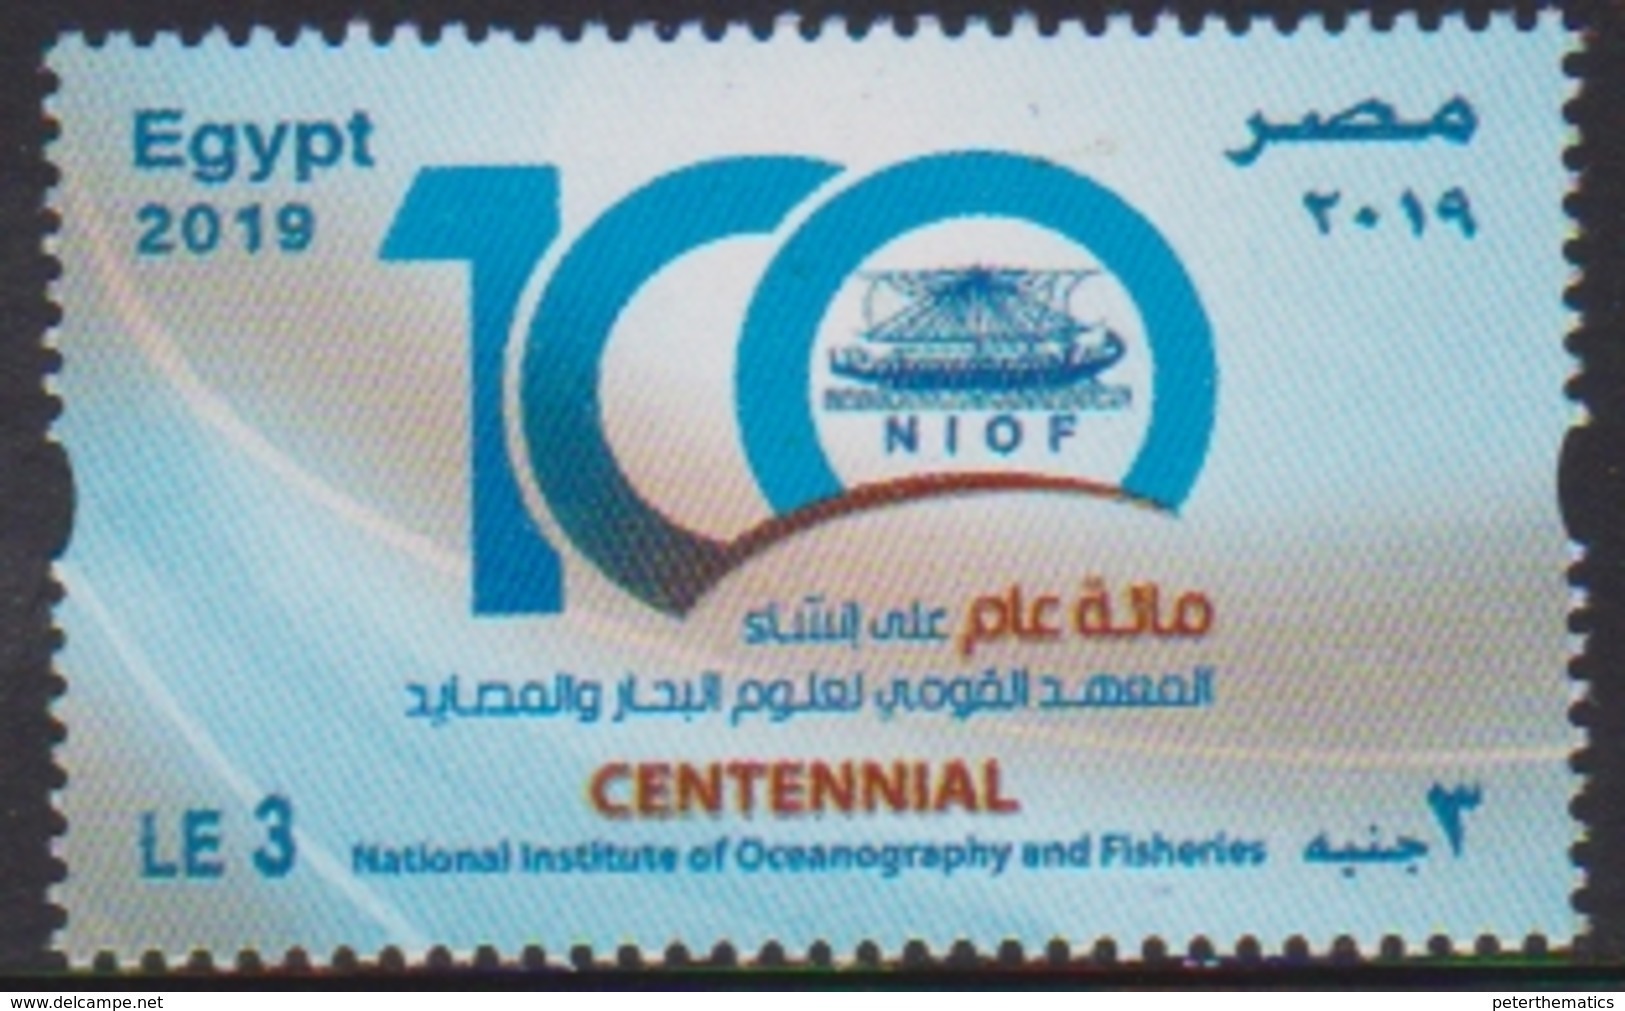 EGYPT, 2019, MNH, CENTENARY OF NATIONA LINSTITUTE OF OCENAOGRAPHY AND FISHERIES, SHIPS, 1v - Ships